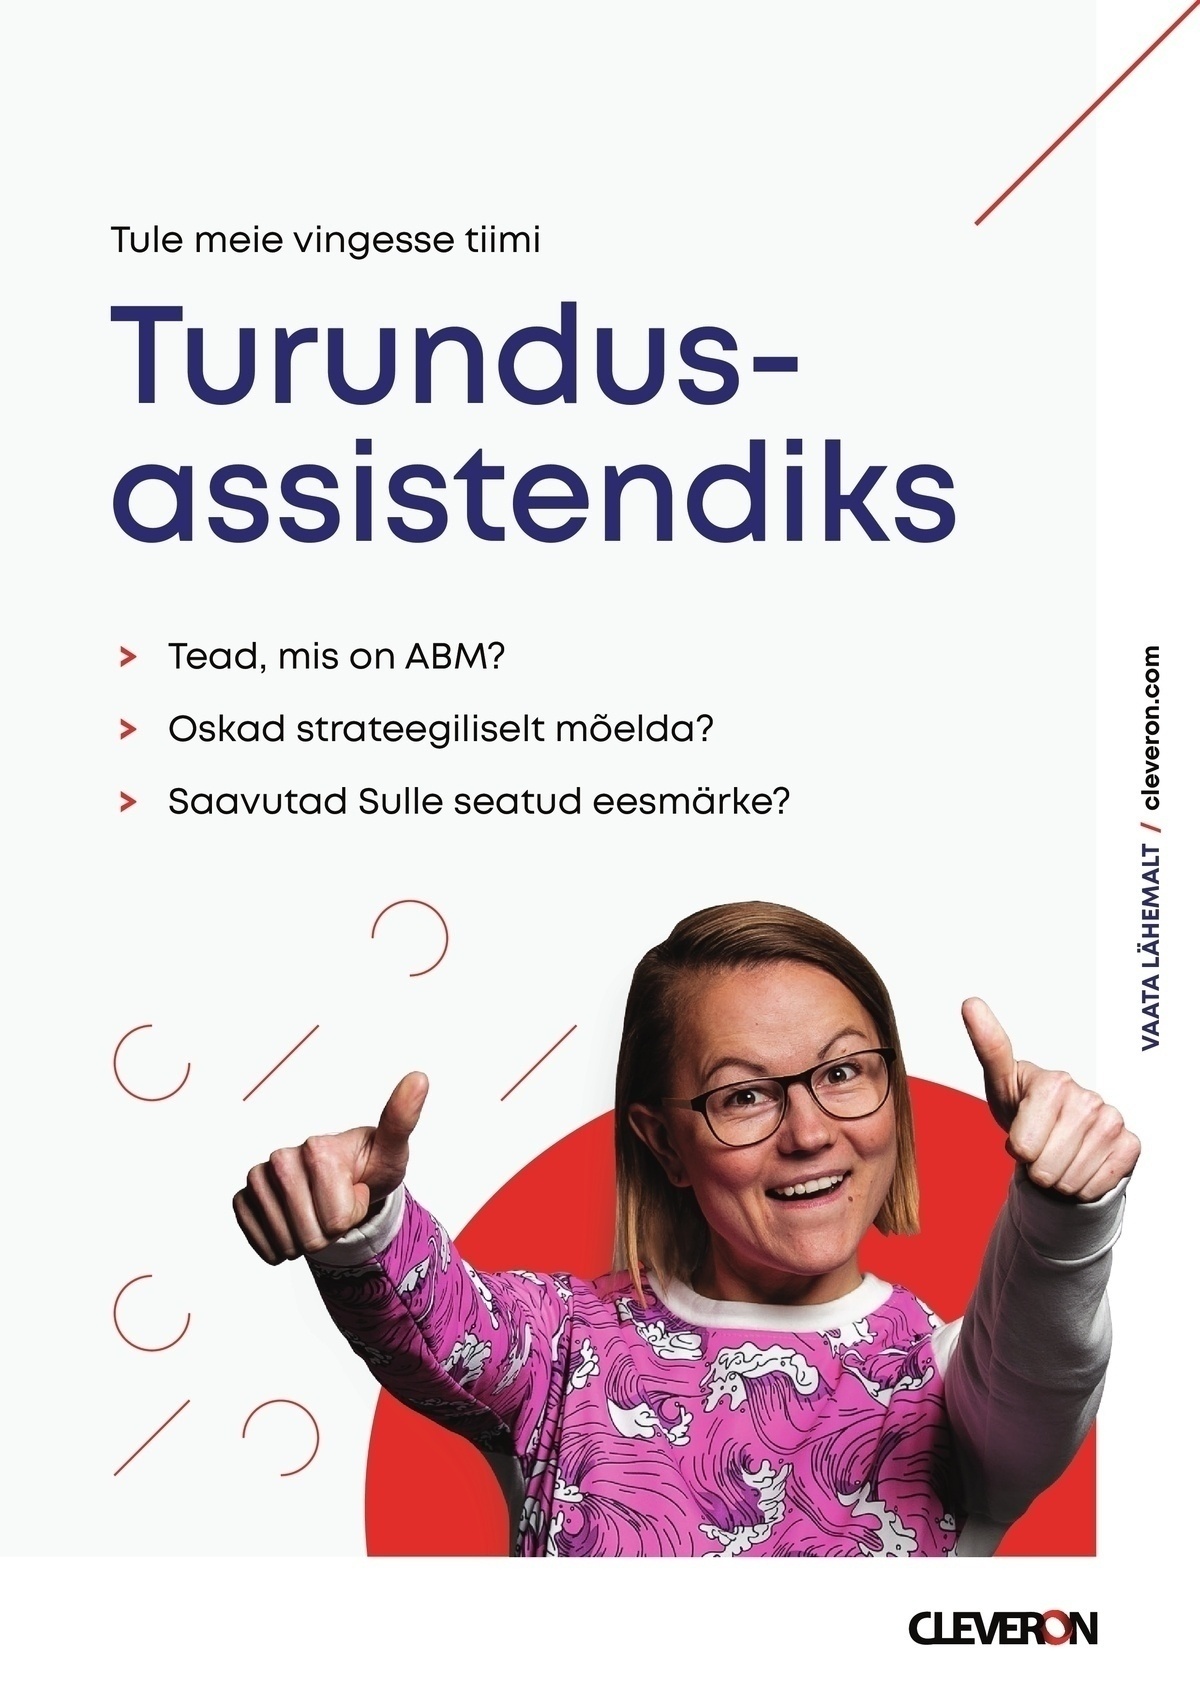 CLEVERON AS Turundusassistent